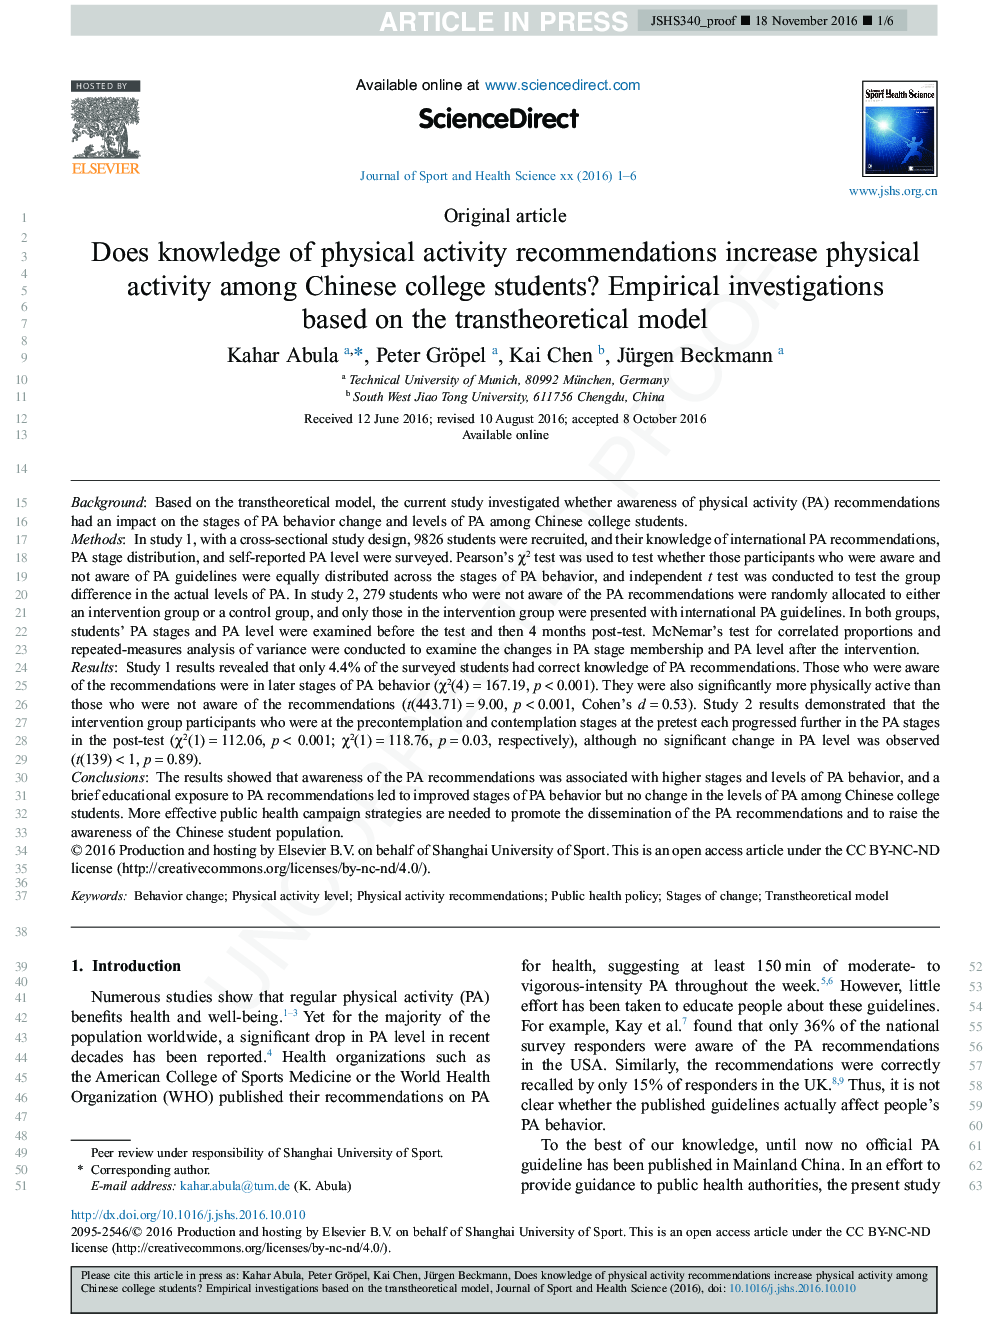 Does knowledge of physical activity recommendations increase physical activity among Chinese college students? Empirical investigations based on the transtheoretical model